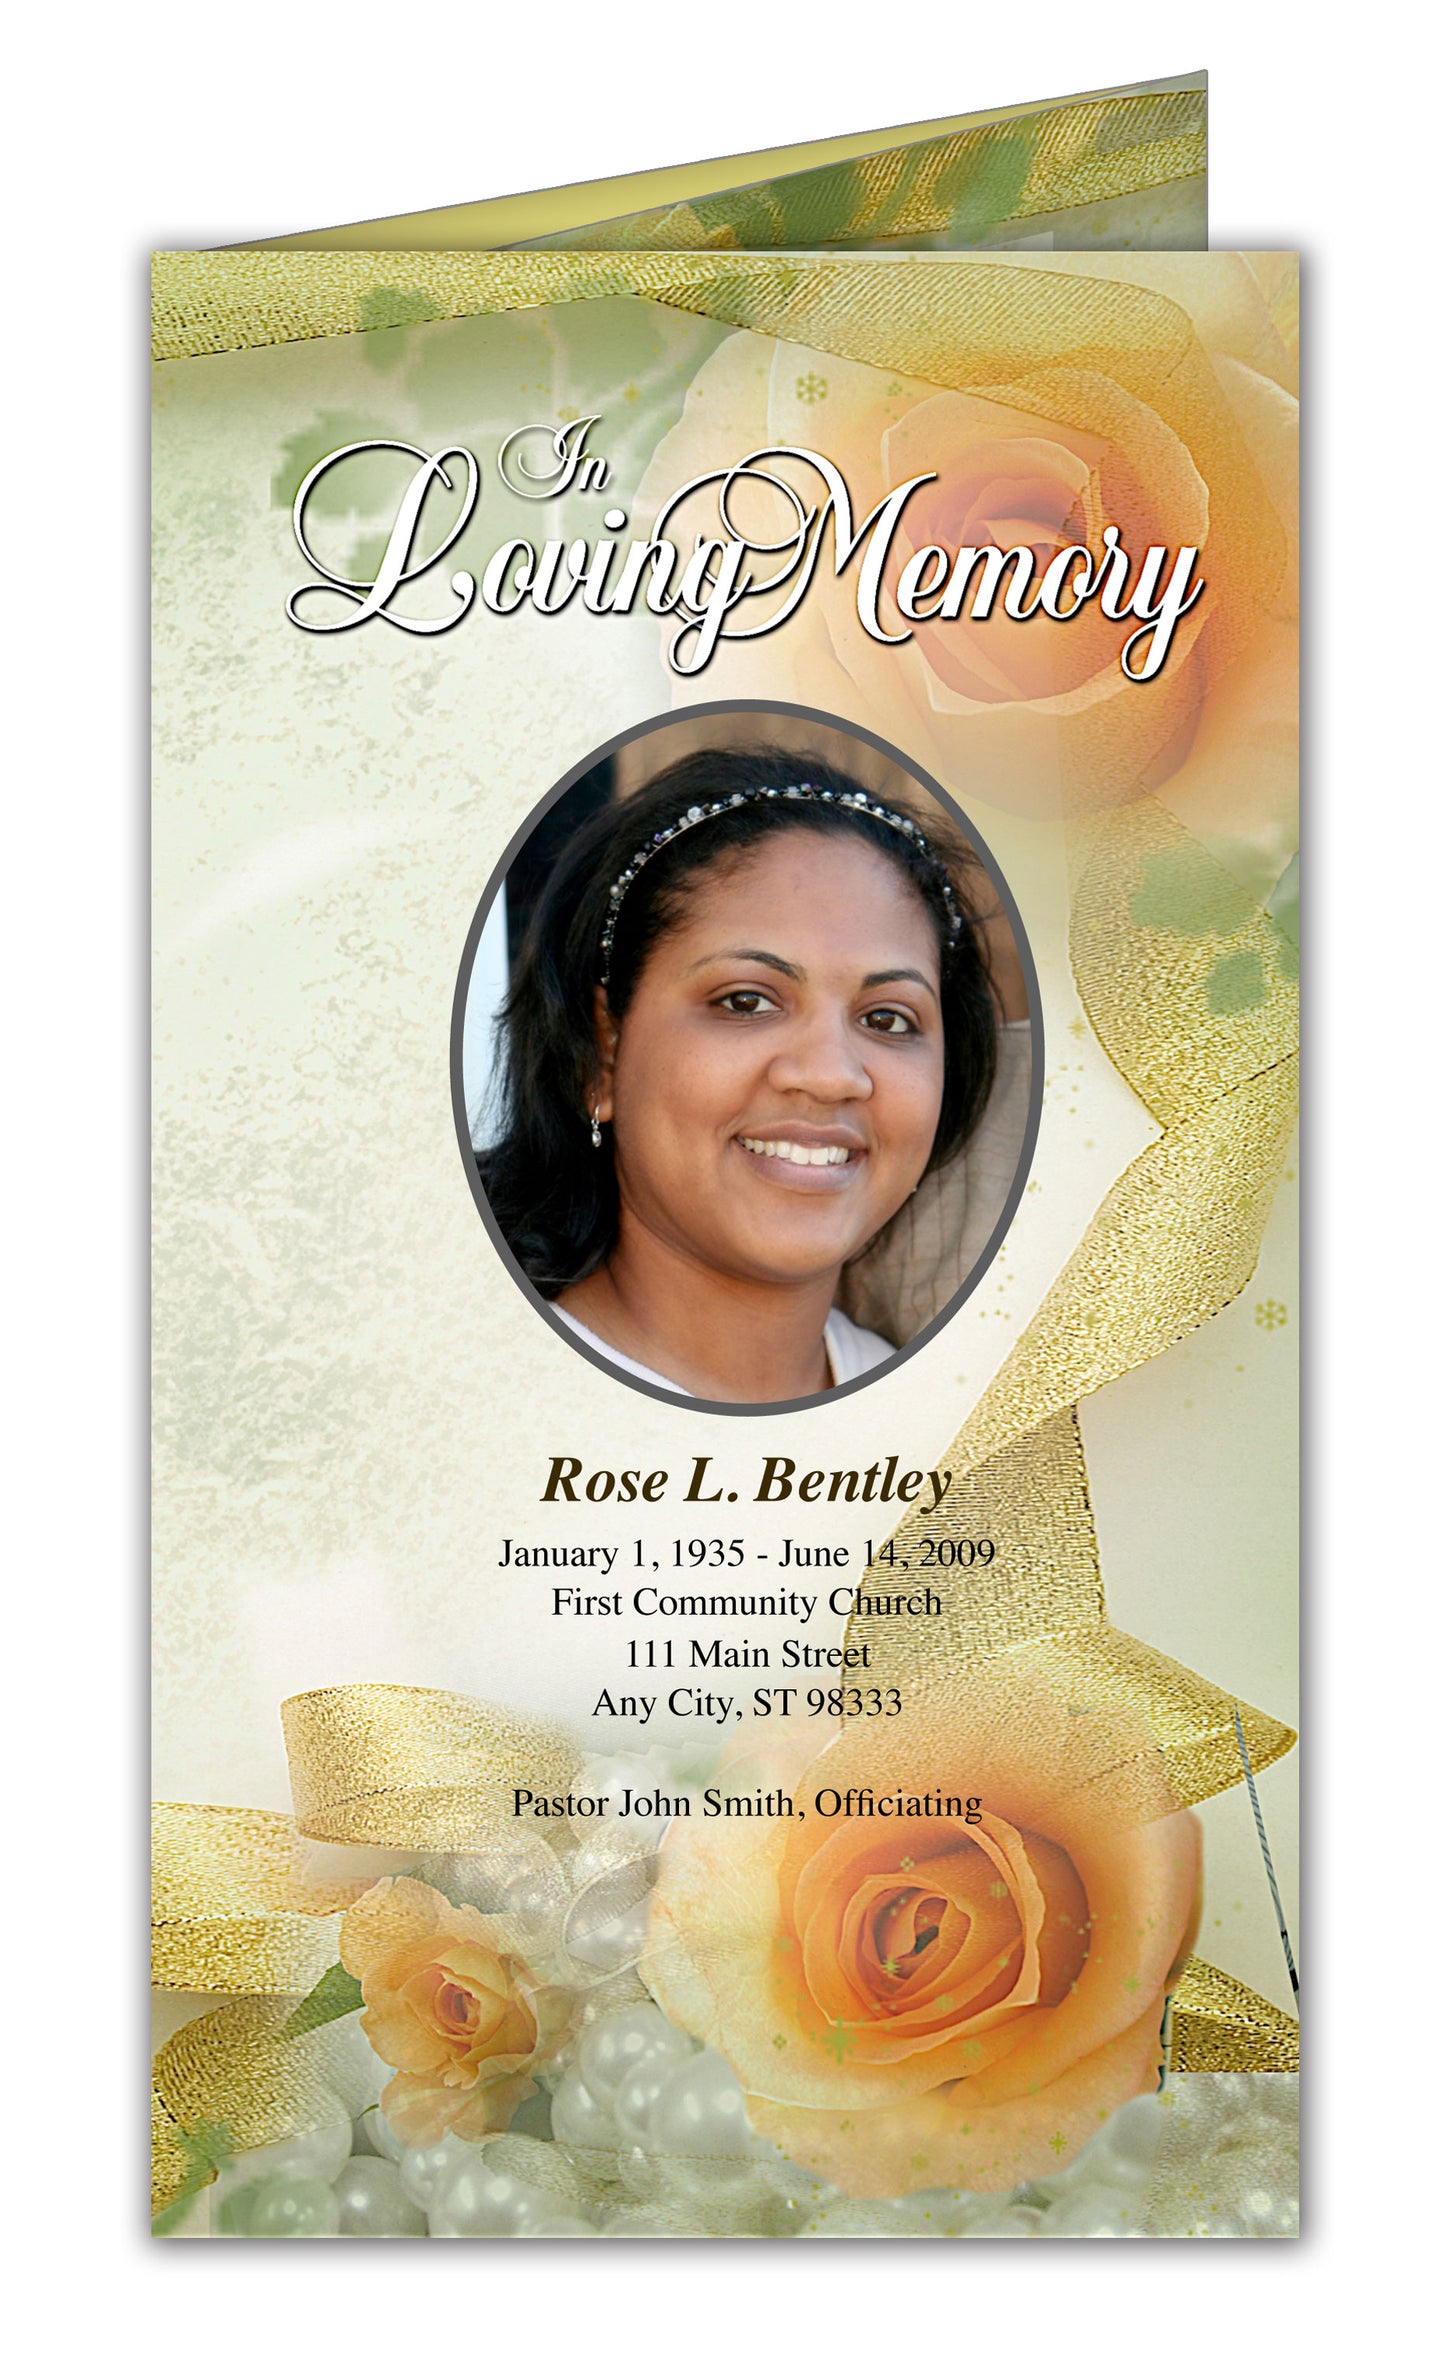 Rejoice TriFold Funeral Brochure Template.